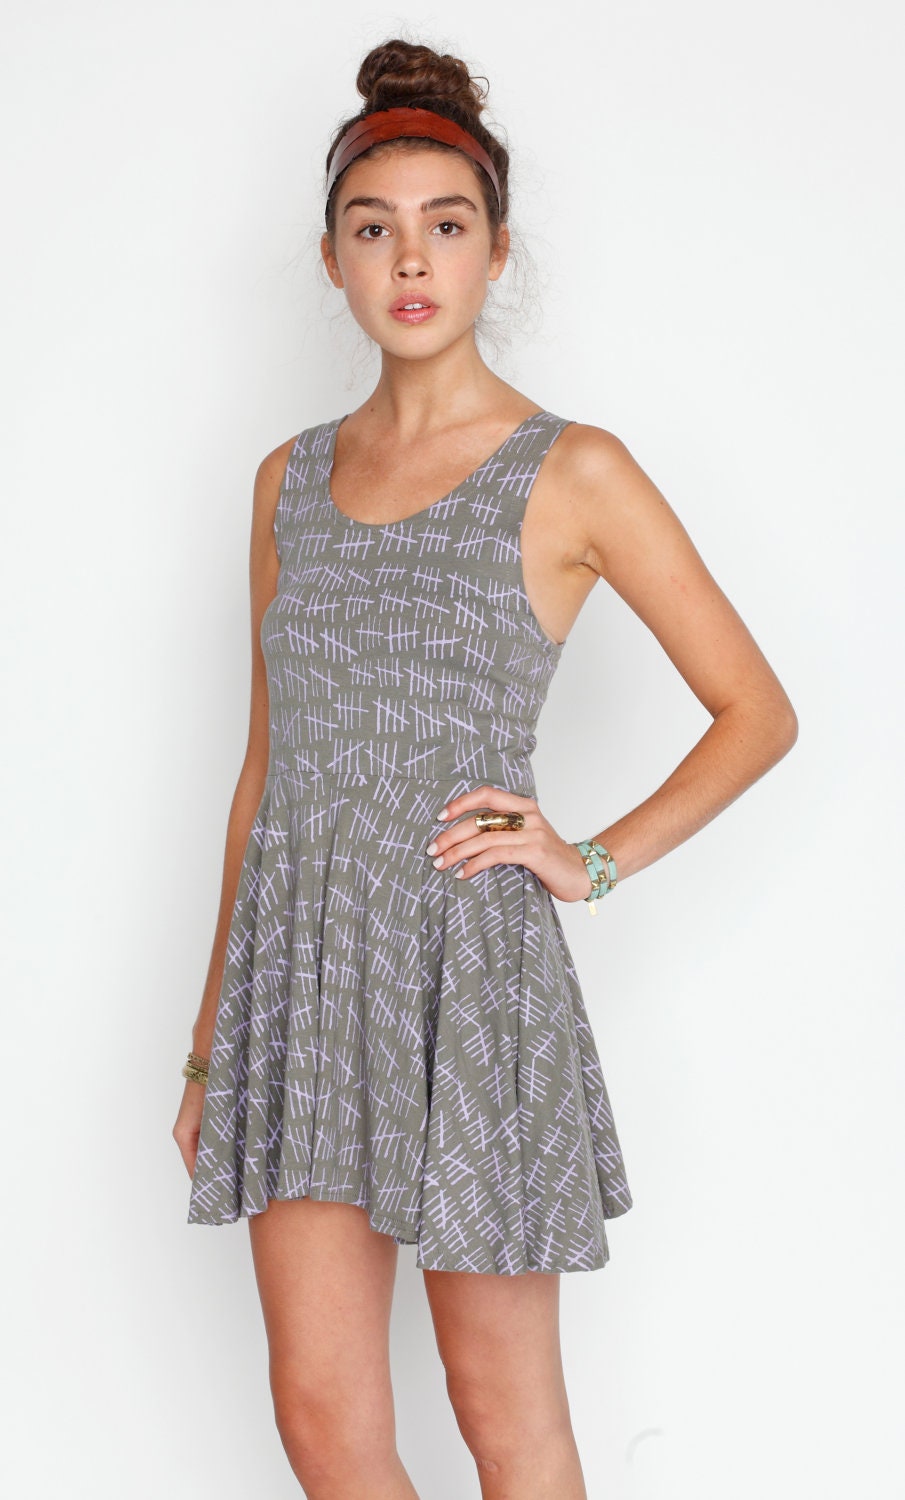 Hand Printed 'Hash Marks' Twirling Dress in Lavender on Fern